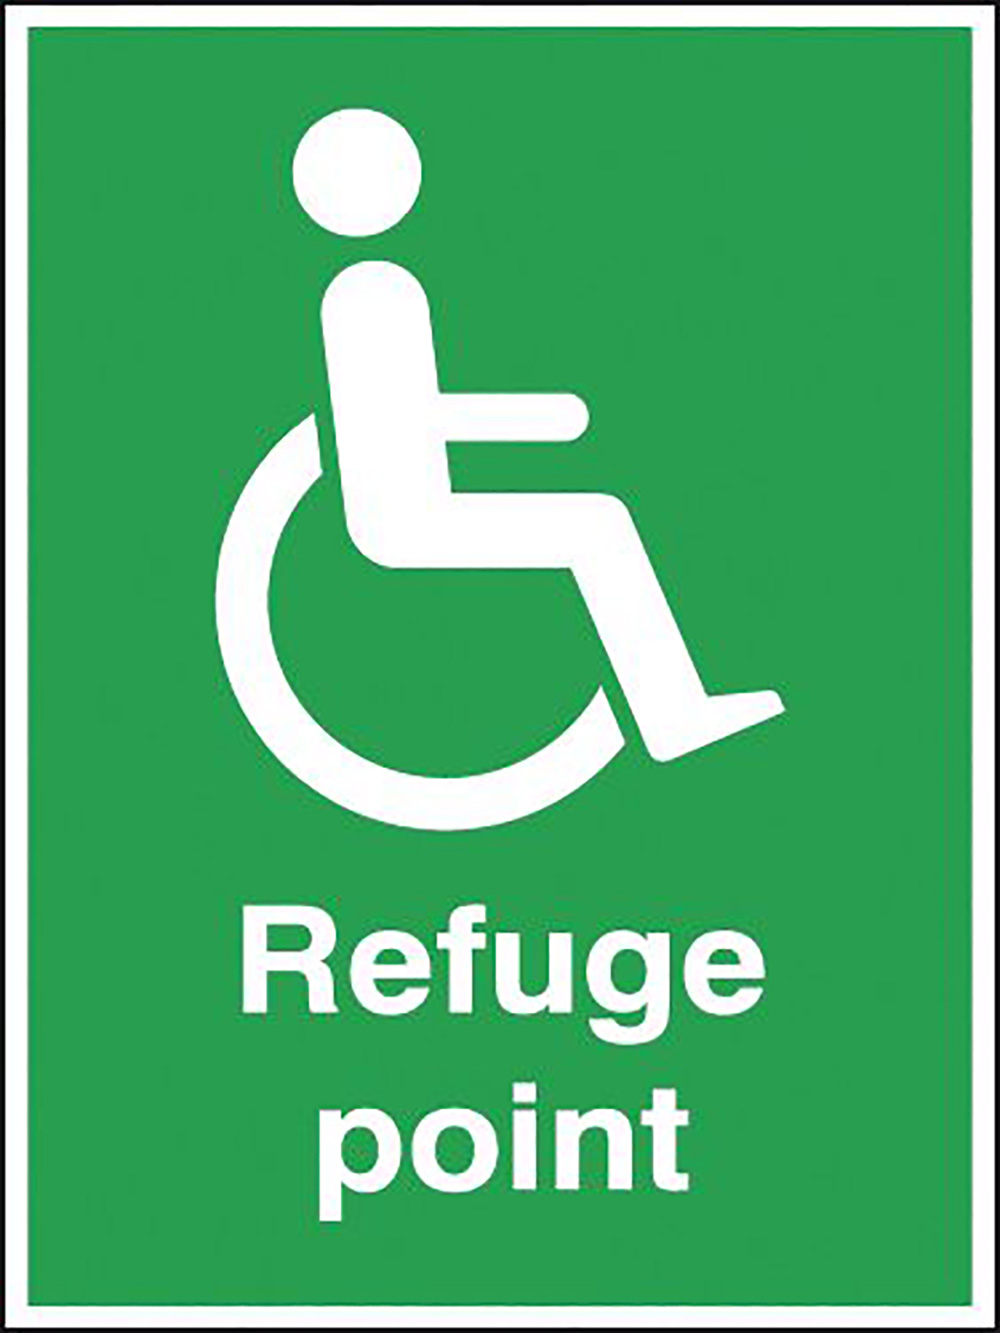 Refuge point  400x300mm 3mm Aluminium Safety Sign  